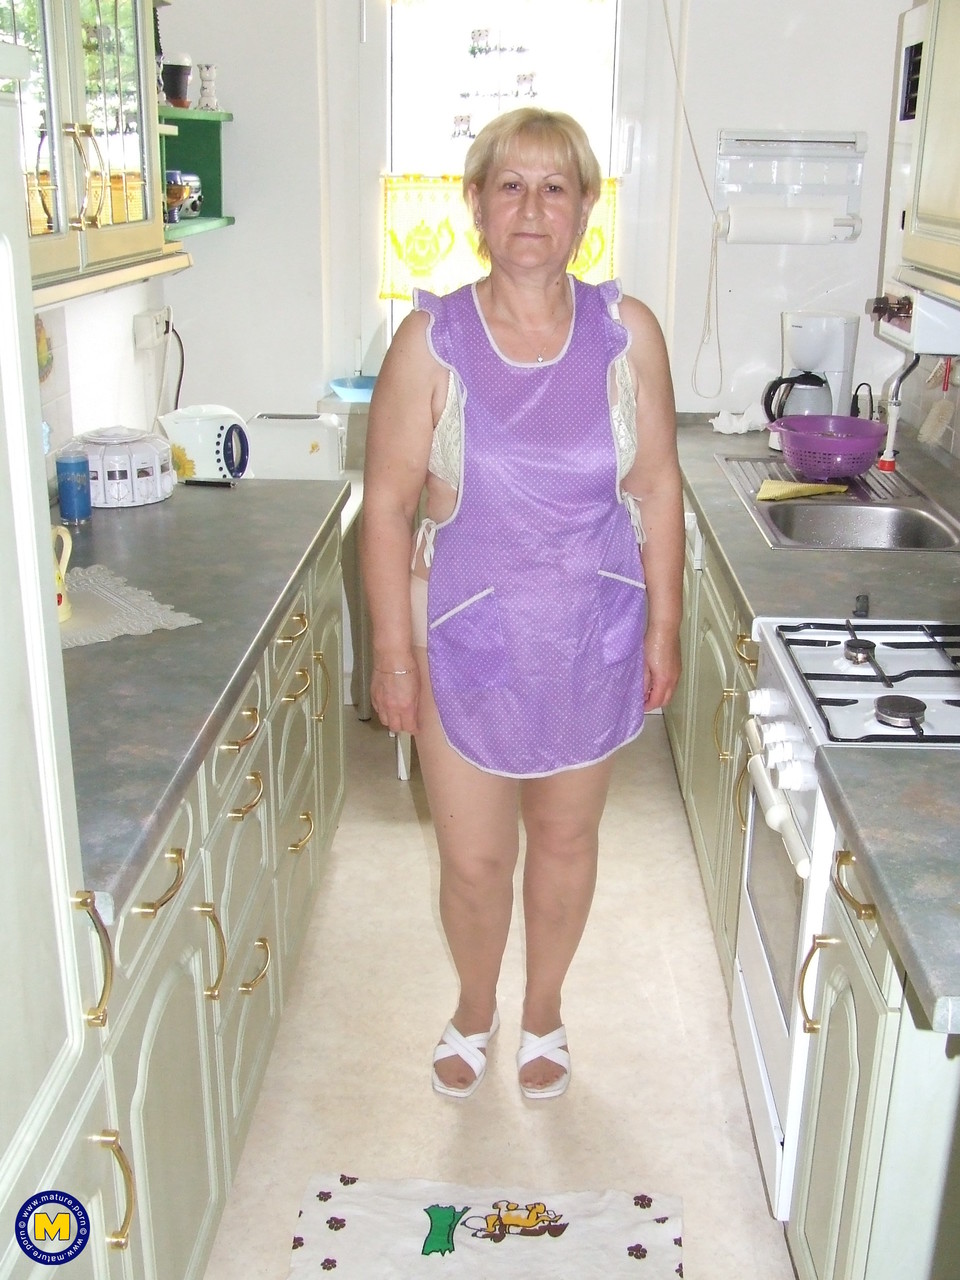 Short haired German cleaning lady Dagmar shows her mature cunt in the kitchen порно фото #425226956 | Mature NL Pics, Dagmar, German, мобильное порно